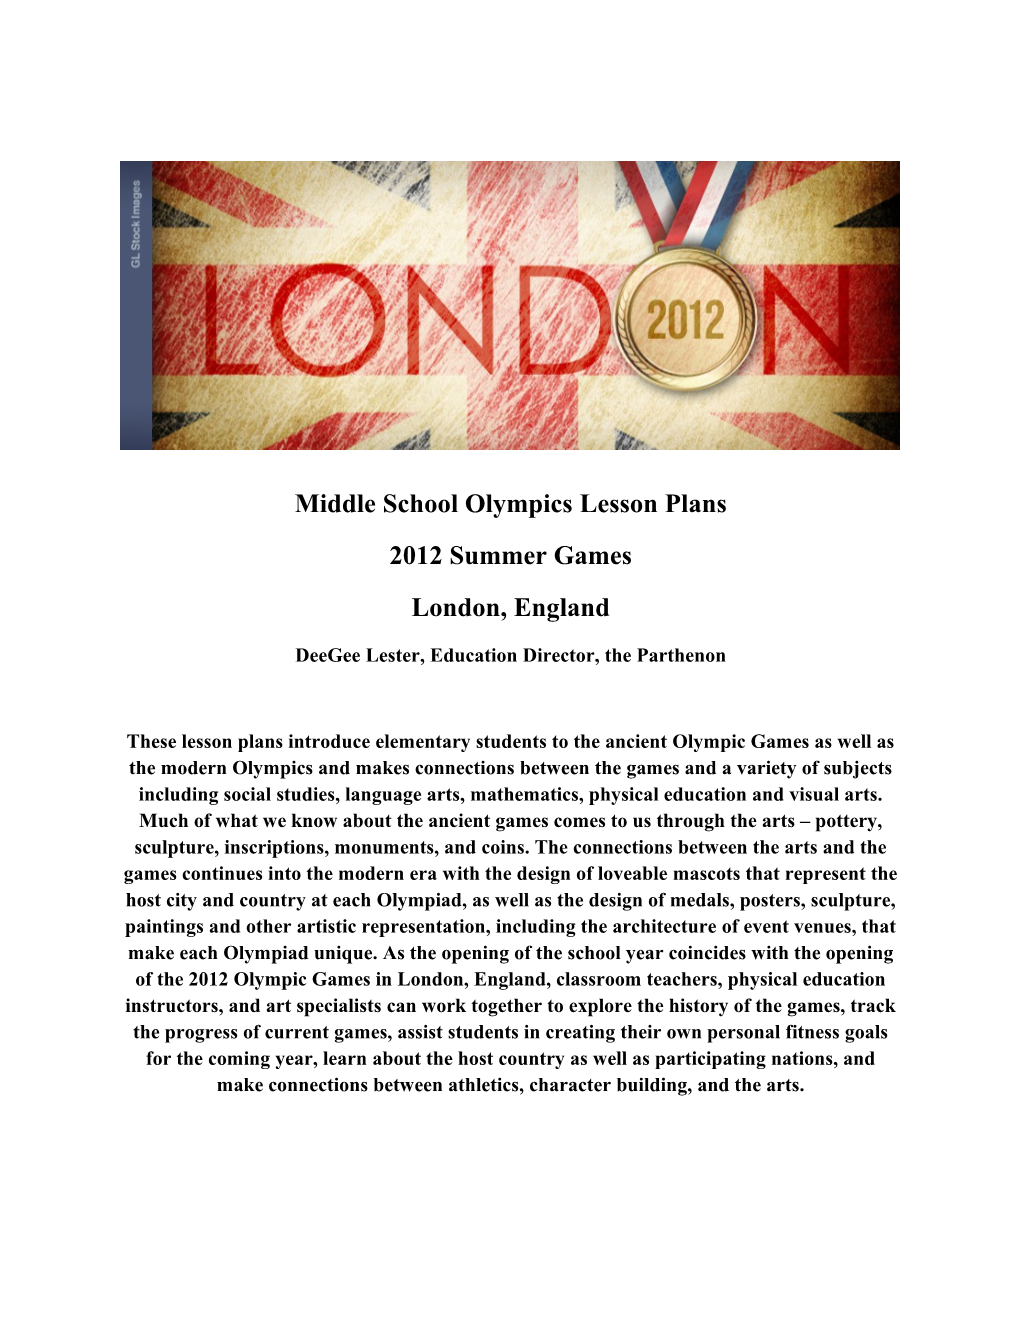 Middle School Olympics Lesson Plans